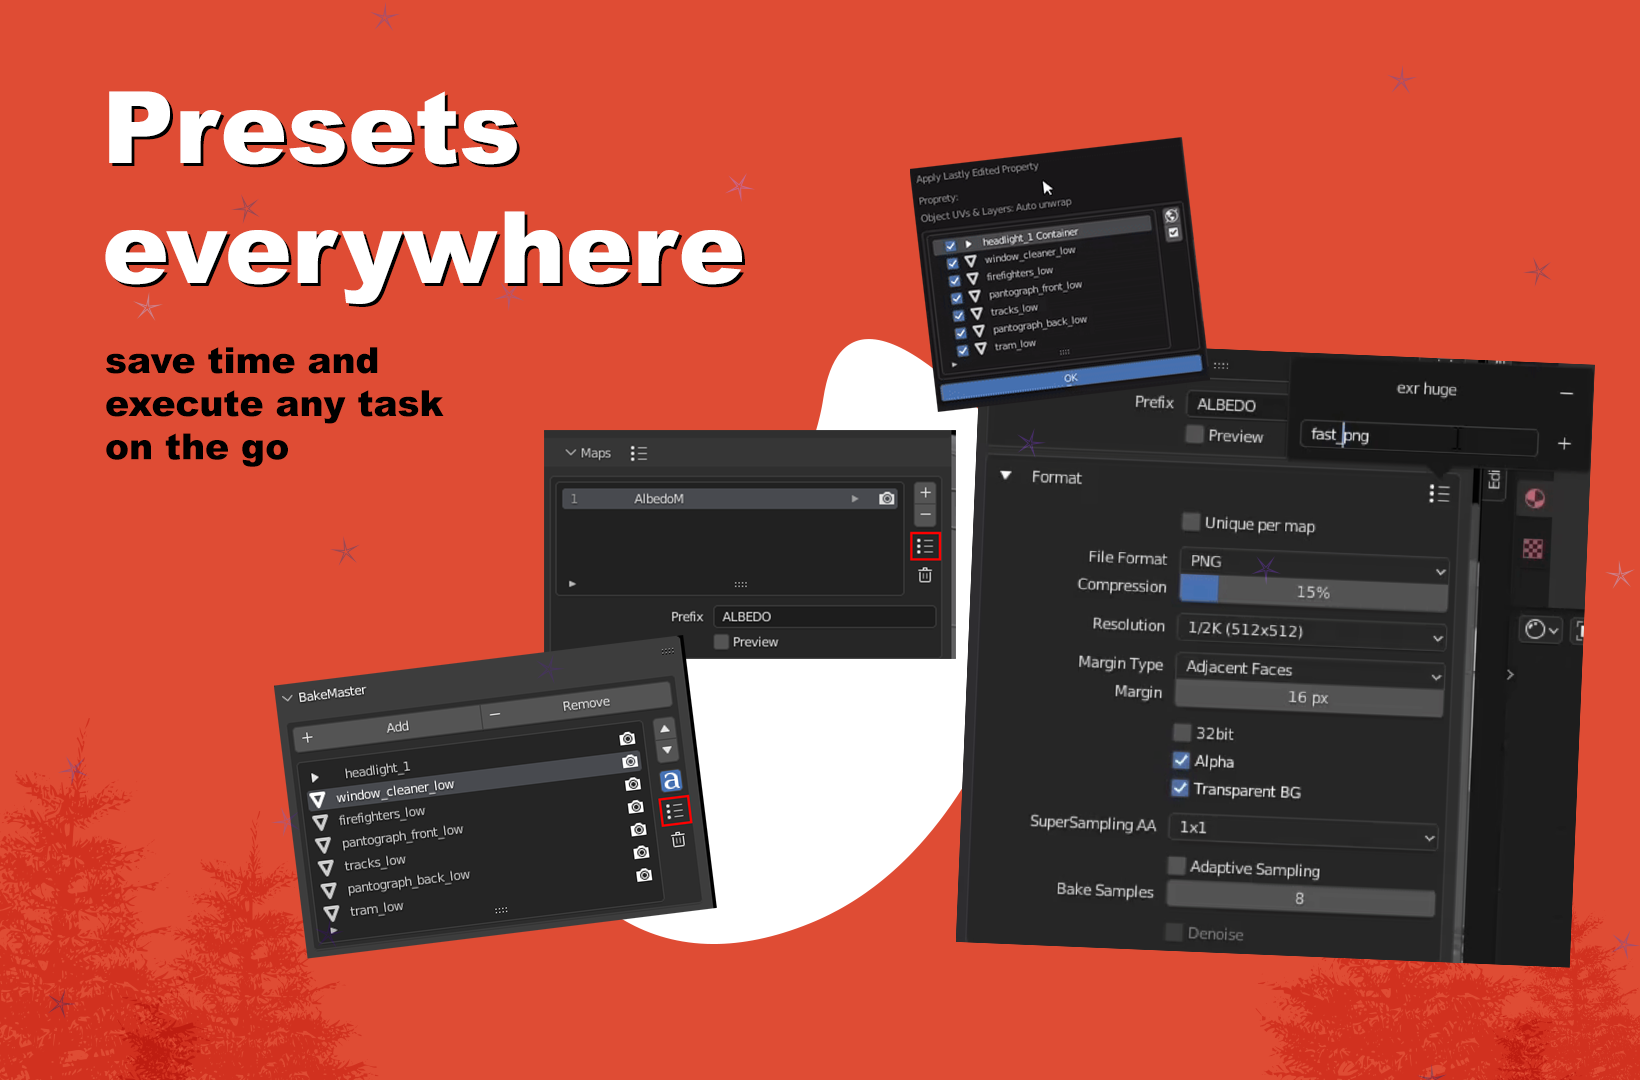 Save time with presets and execute any task on the go